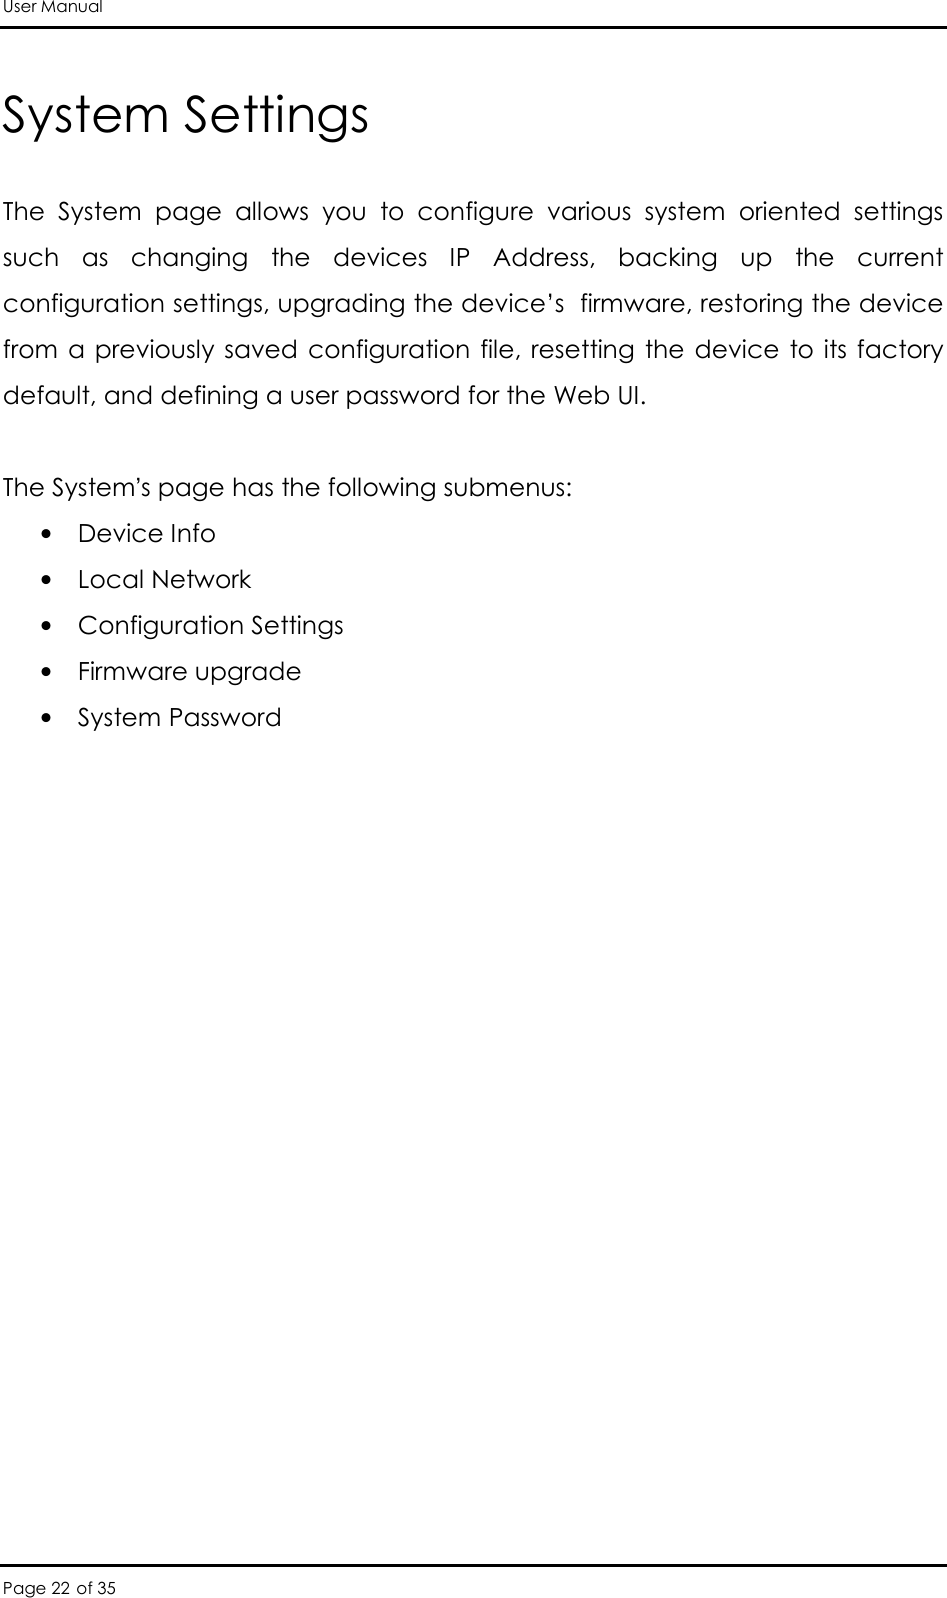 User Manual Page 22 of 35 System Settings The  System  page  allows  you  to  configure  various  system  oriented  settings such  as  changing  the  devices  IP  Address,  backing  up  the  current configuration settings, upgrading the device’s  firmware, restoring the device from a  previously  saved  configuration  file, resetting  the device  to its  factory default, and defining a user password for the Web UI.   The System’s page has the following submenus:  • Device Info  • Local Network  • Configuration Settings  • Firmware upgrade  • System Password   